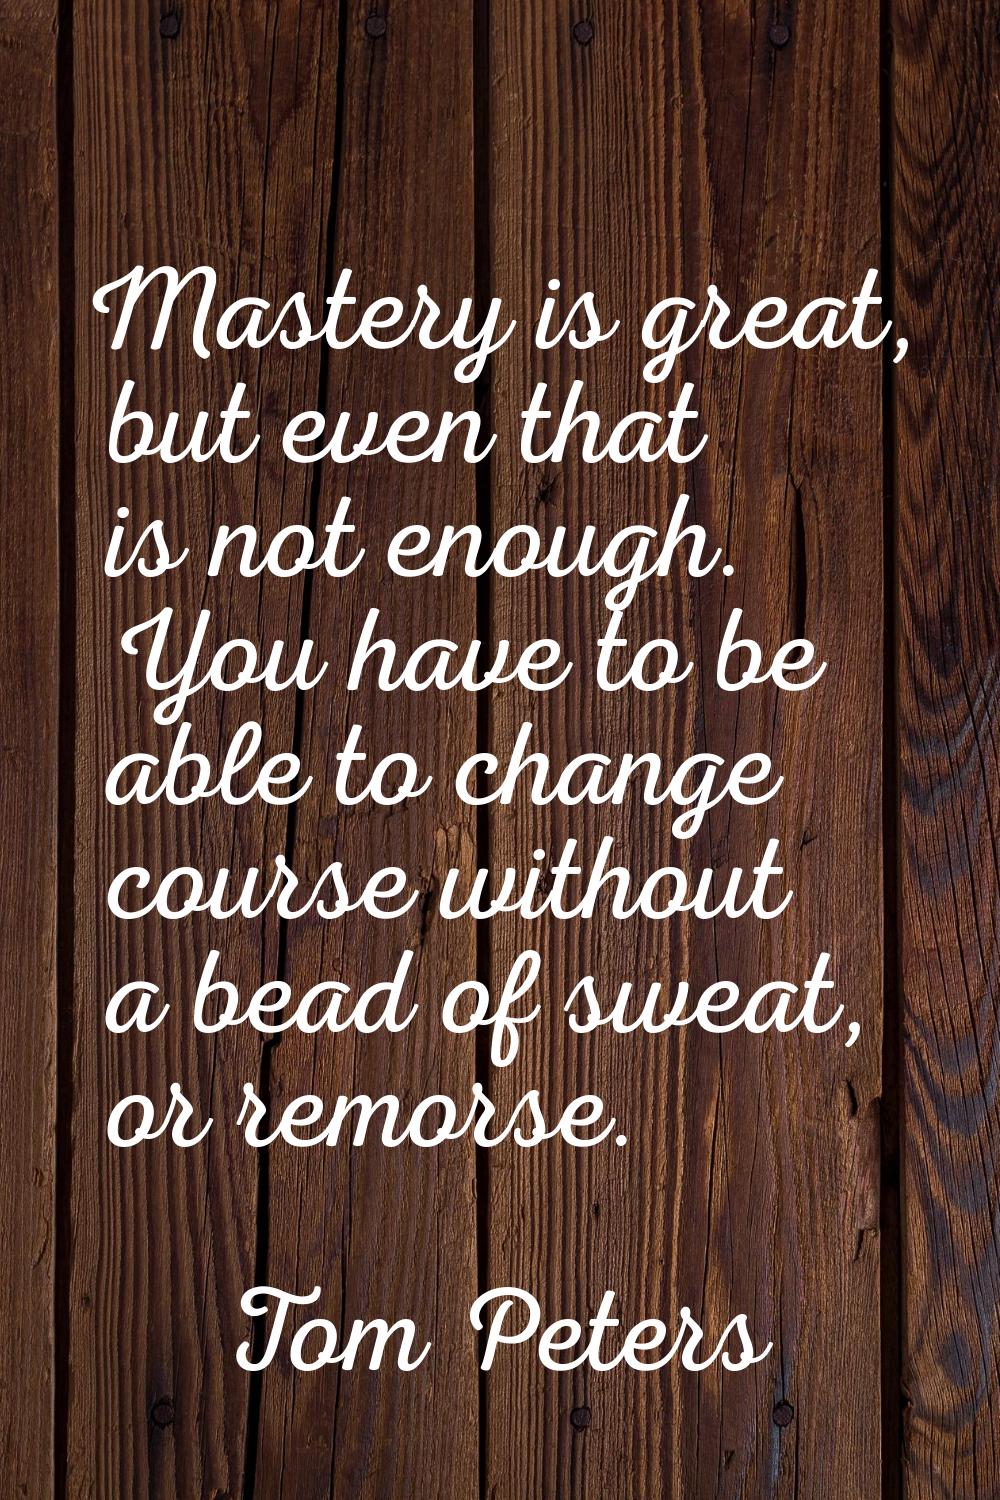 Mastery is great, but even that is not enough. You have to be able to change course without a bead 